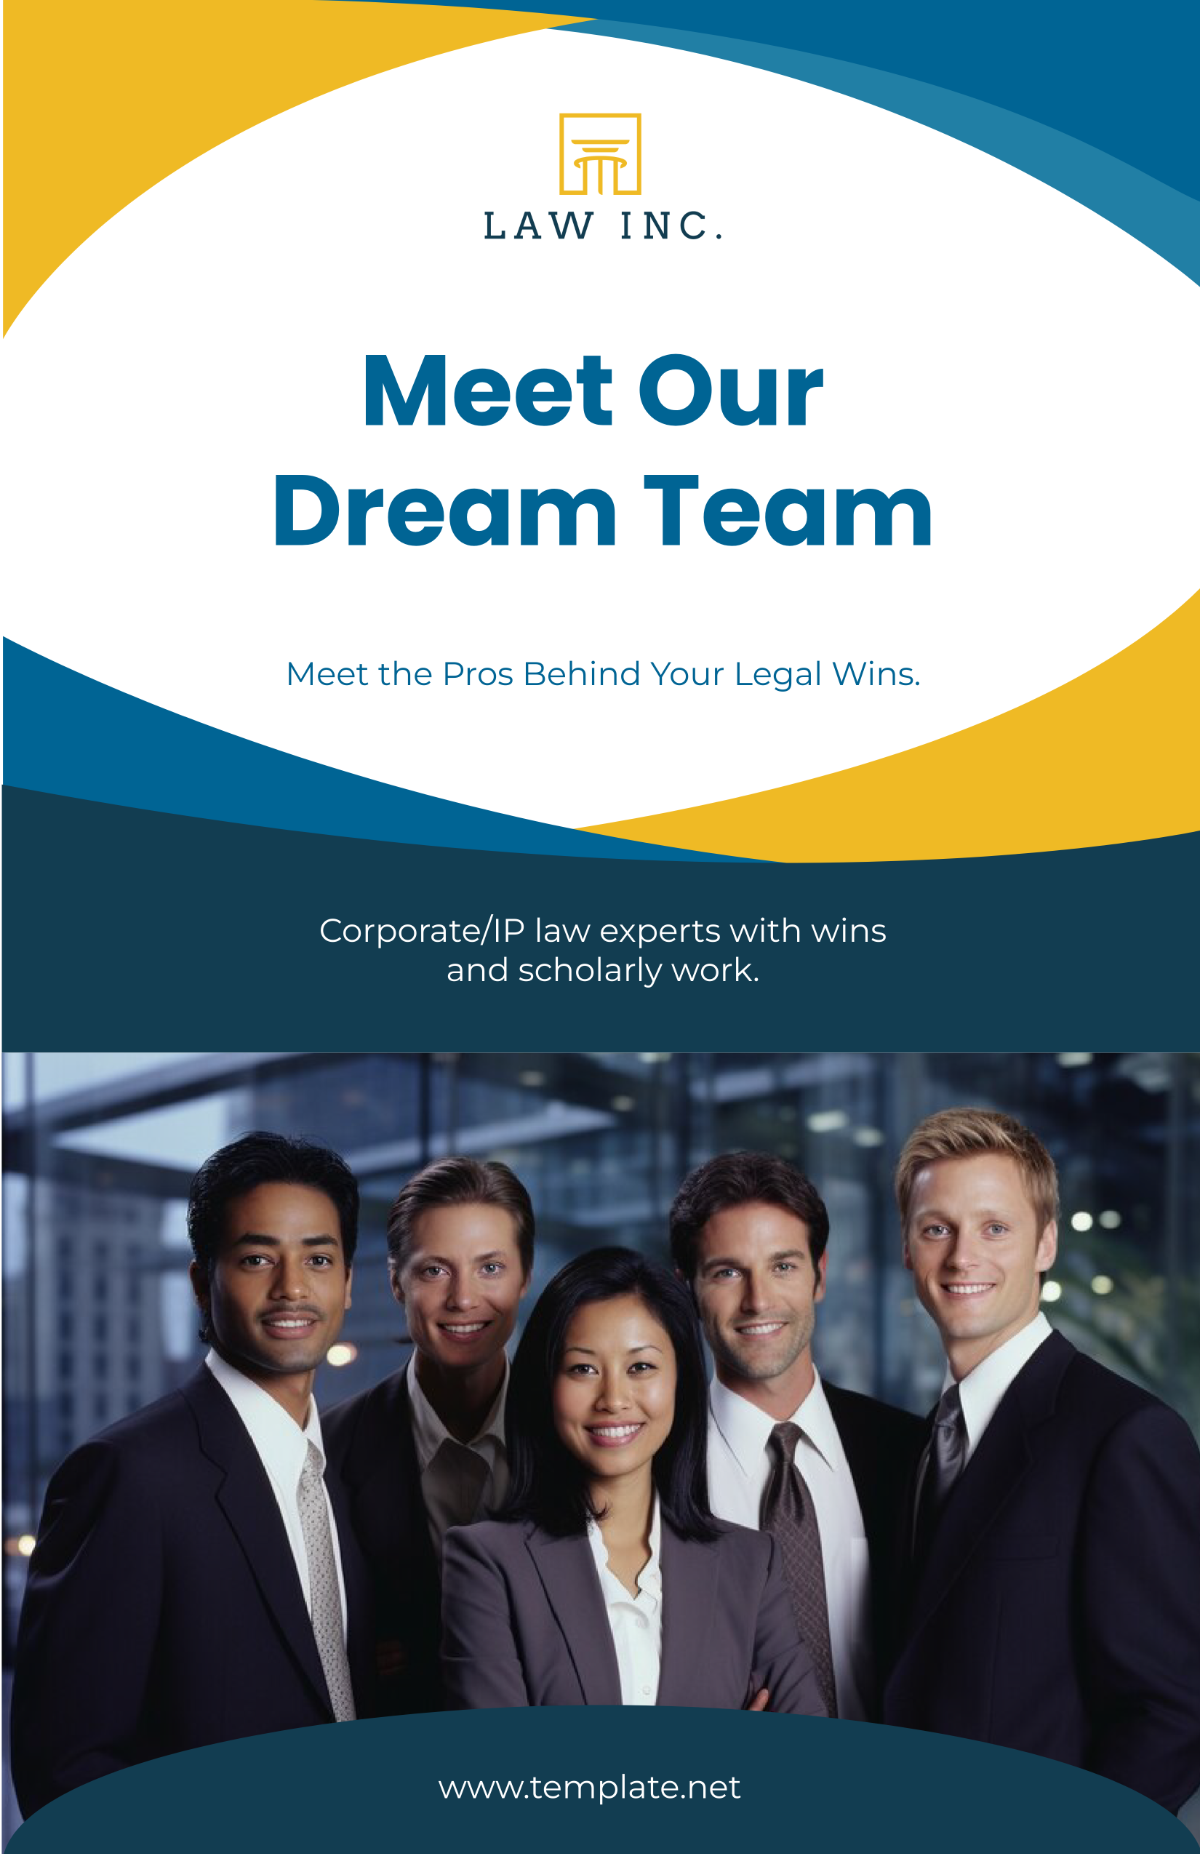 Law Firm Team Poster